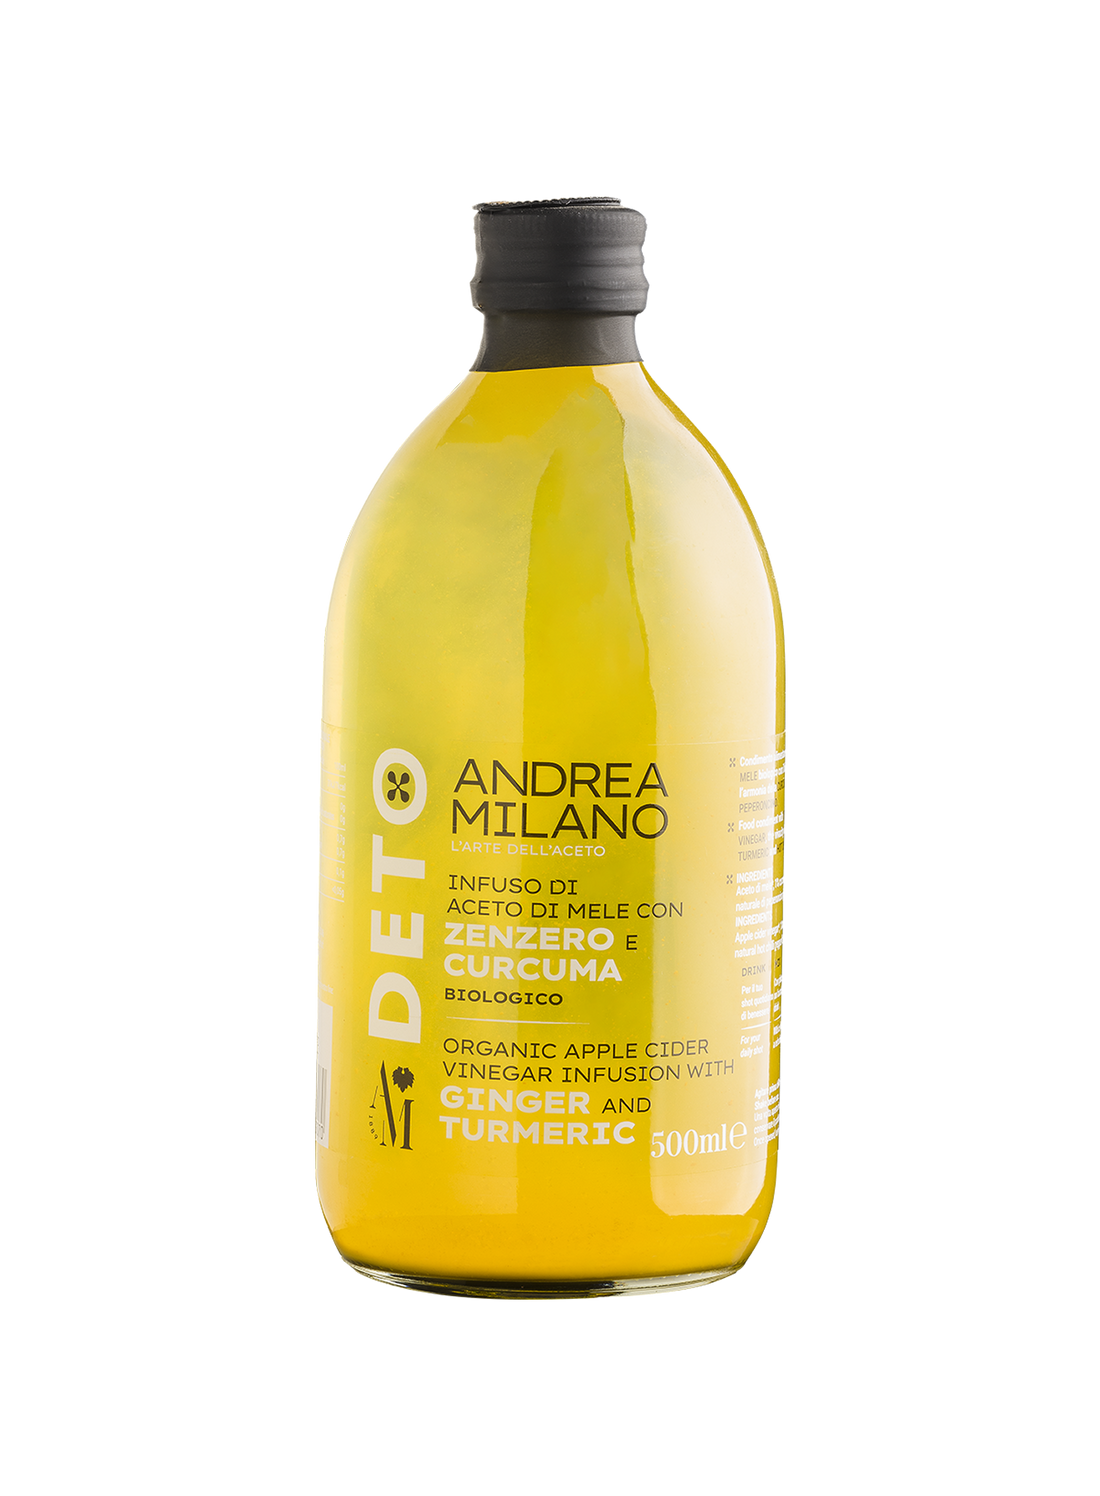 ORGANIC APPLE CIDER VINEGAR INFUSION WITH GINGER AND TURMERIC - DETO ANDREA MILANO